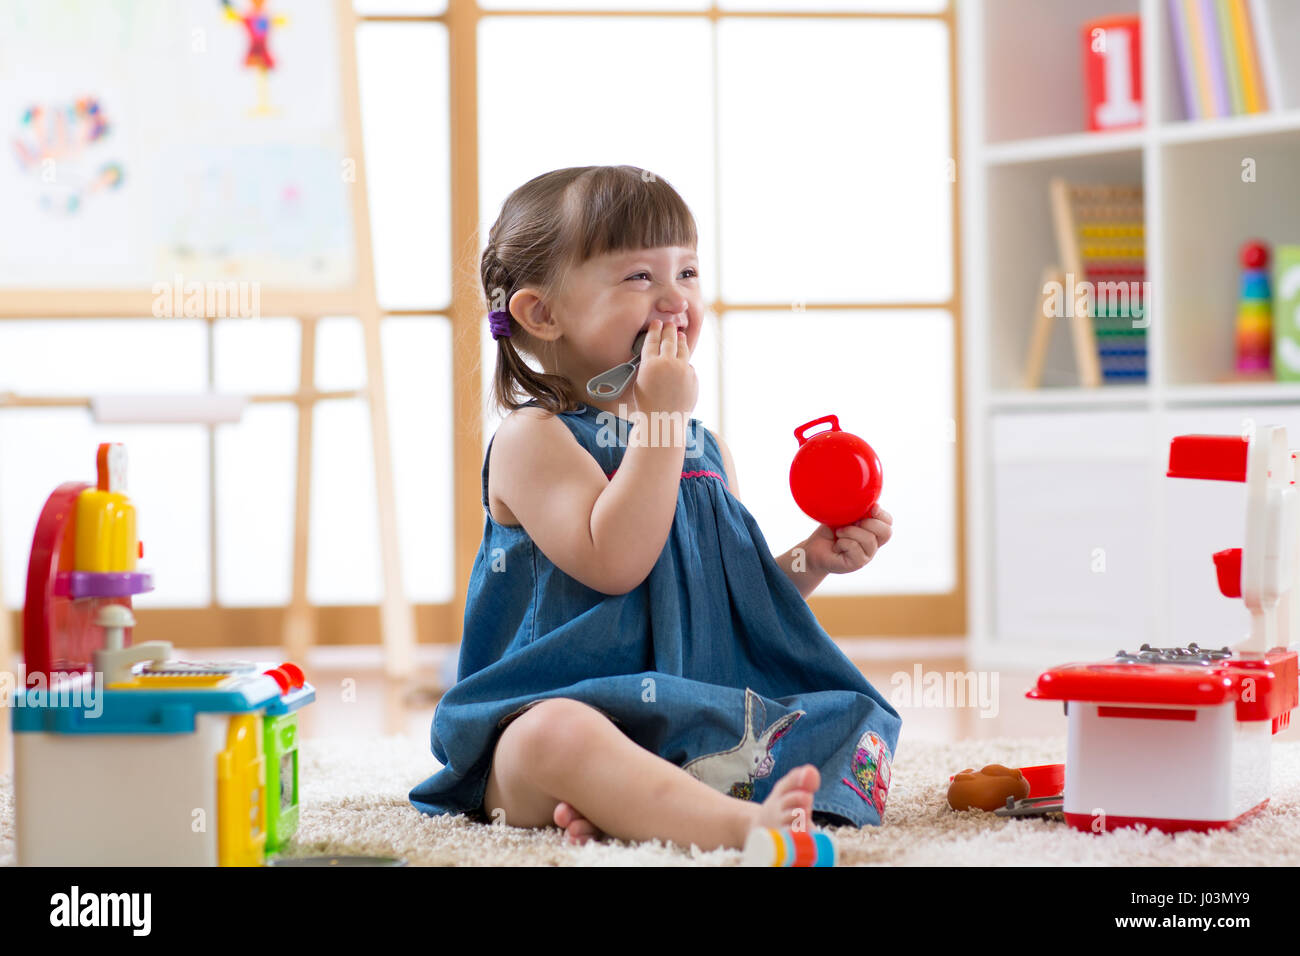 Pretty child girl playing with a toy kitchen in children room Stock Photo